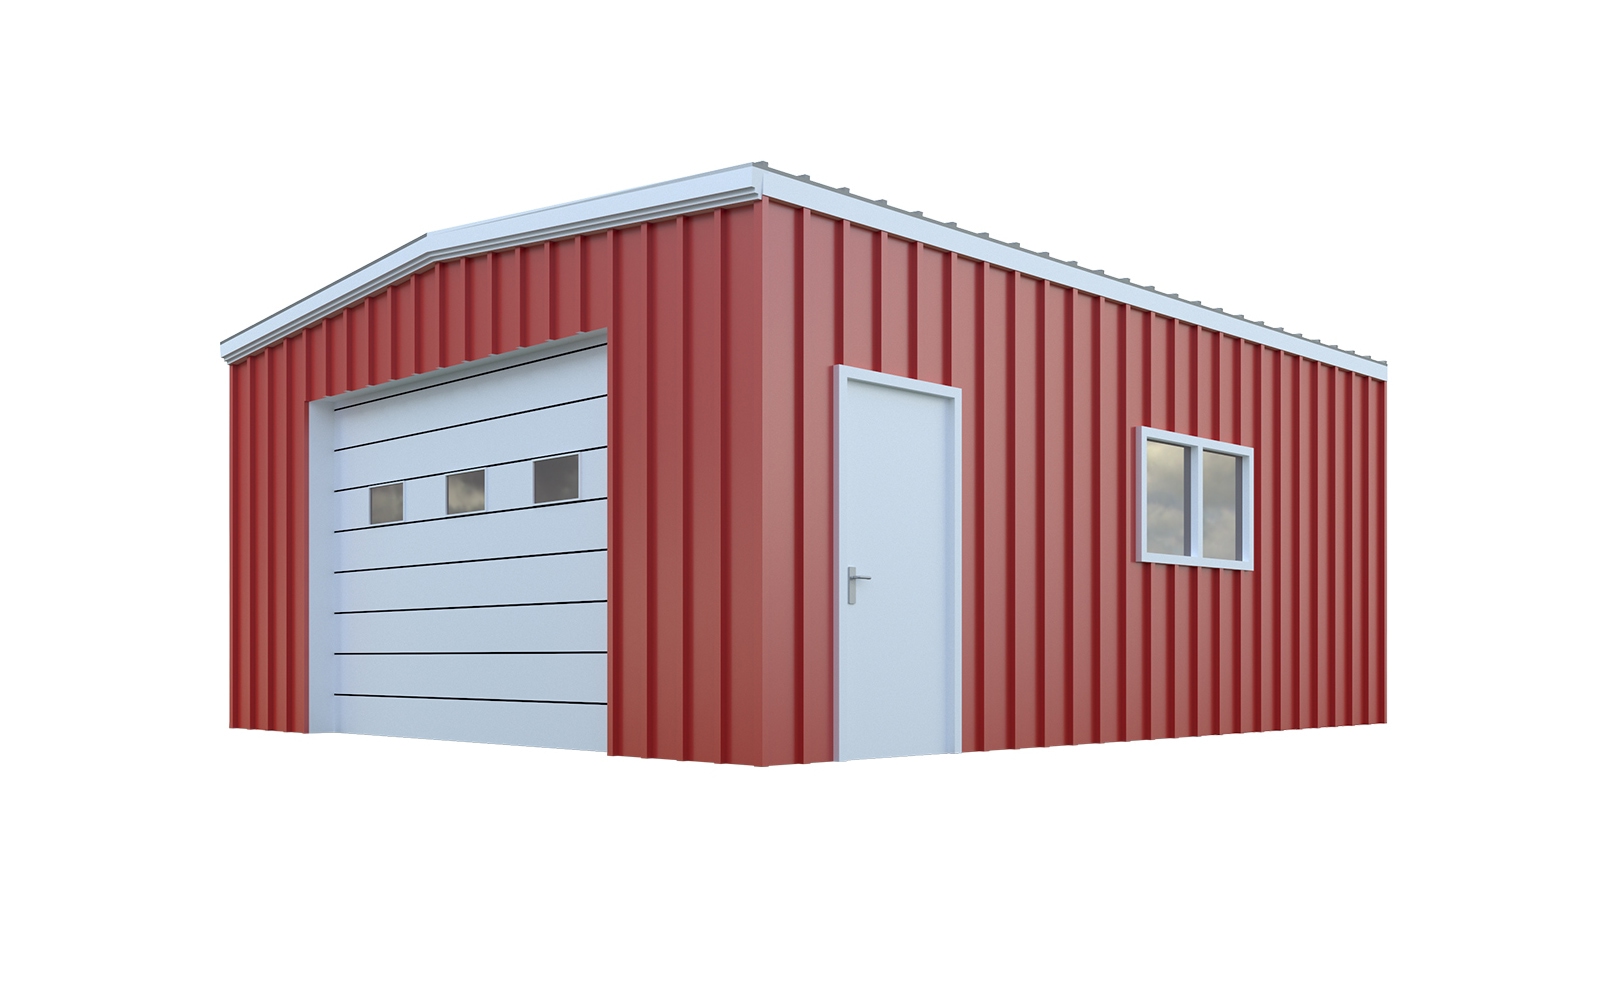 The 16x20 steel building package is a popular choice for 